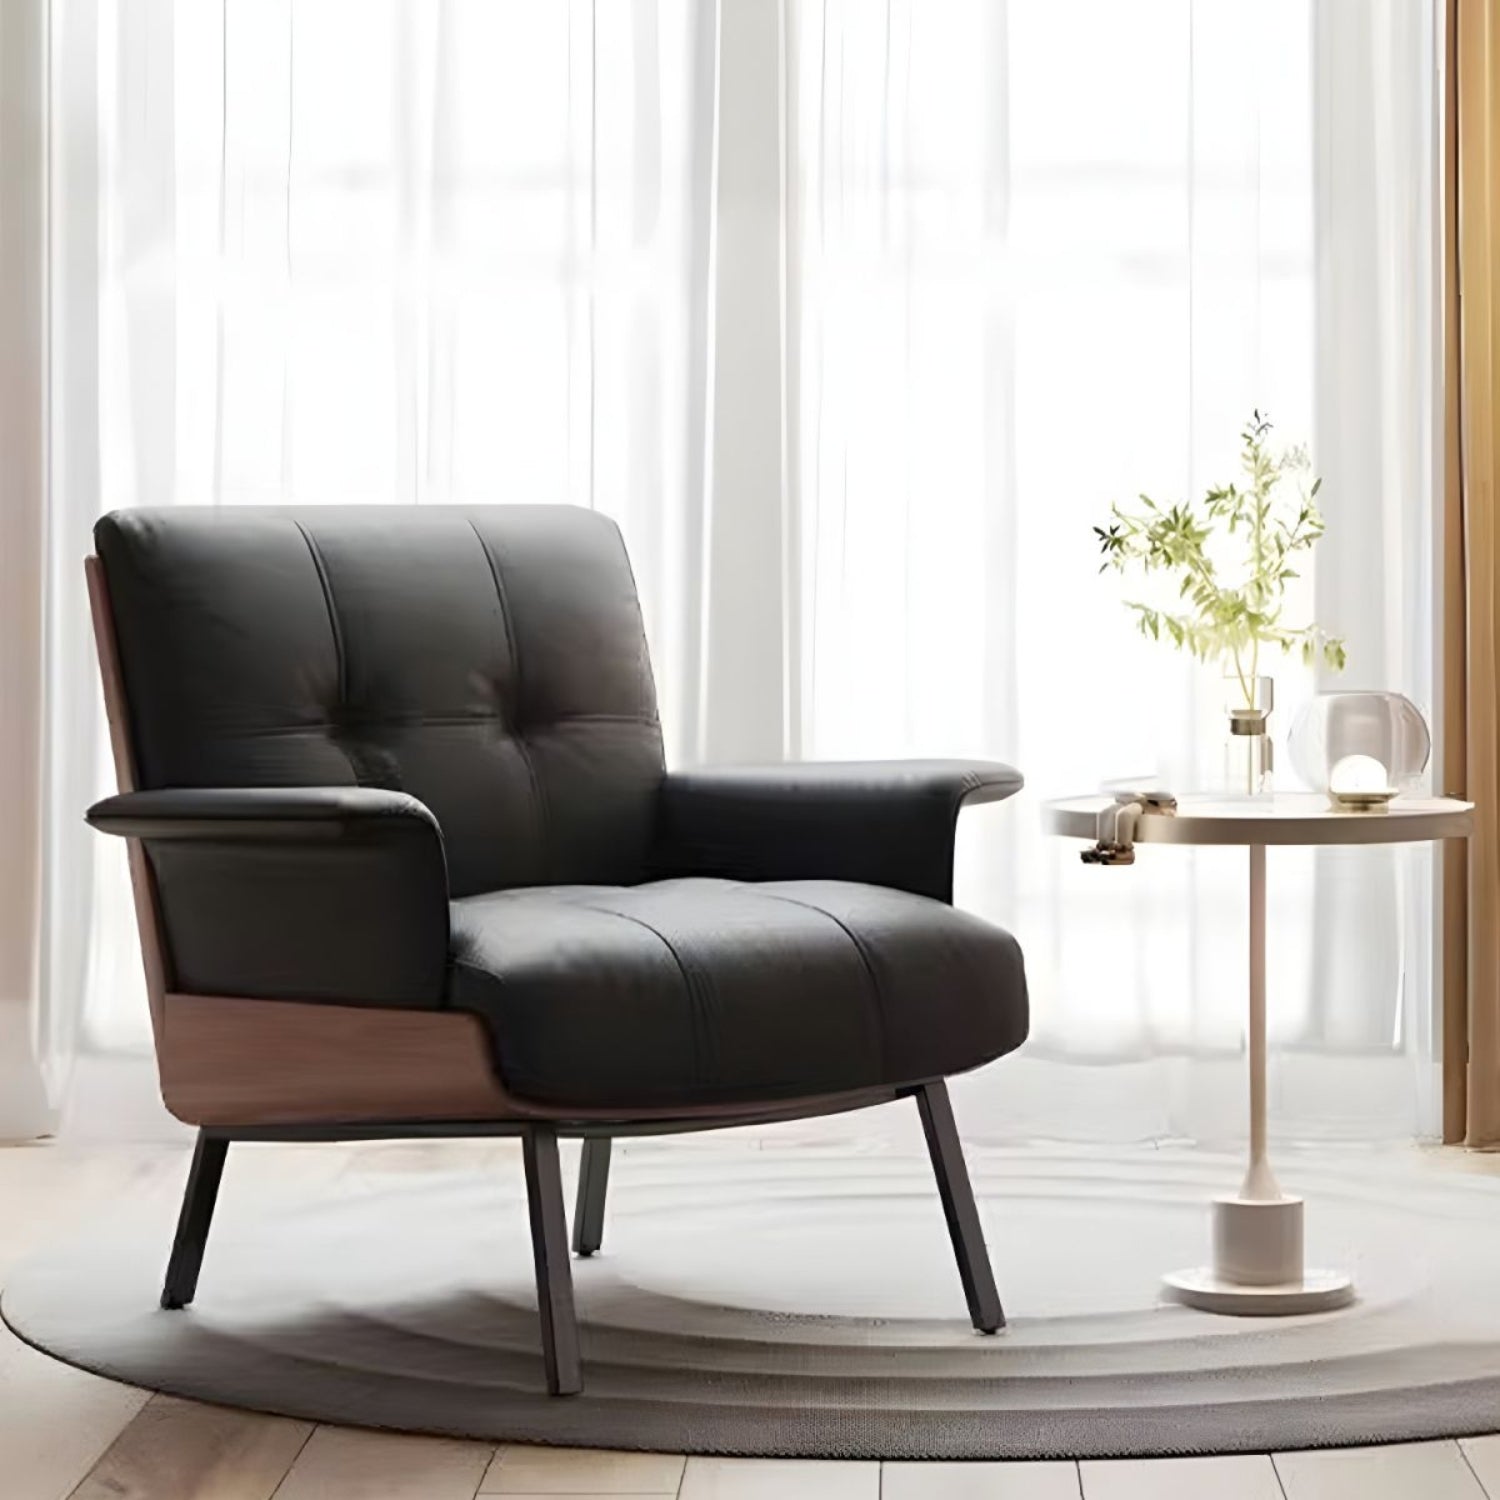 Replica Daiki sleek black leather lounge armchair in white curtained room.